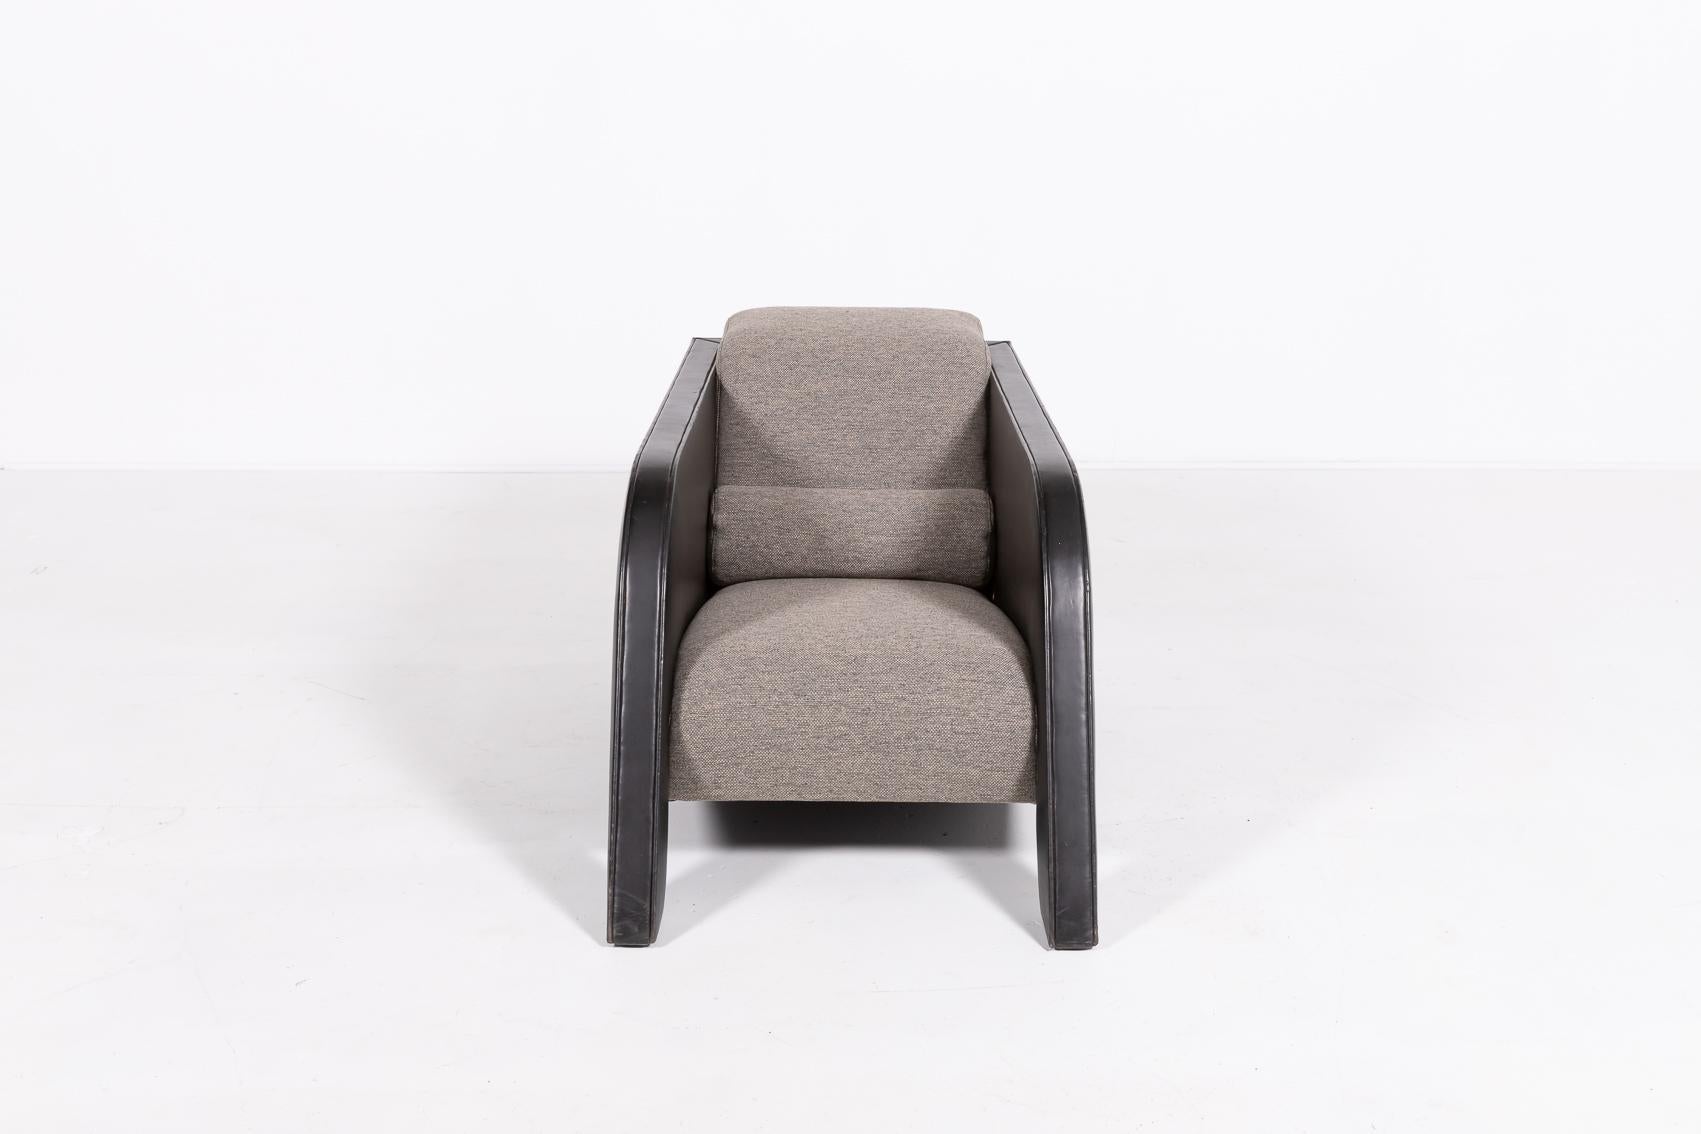 Spectacular design lounge chair from 1980’s by Ulf Moritz., Netherlands. The armchair has unique shape which makes it a direct eye catcher, limited production. The frame is upholstered in black leather, woolen fabric seat